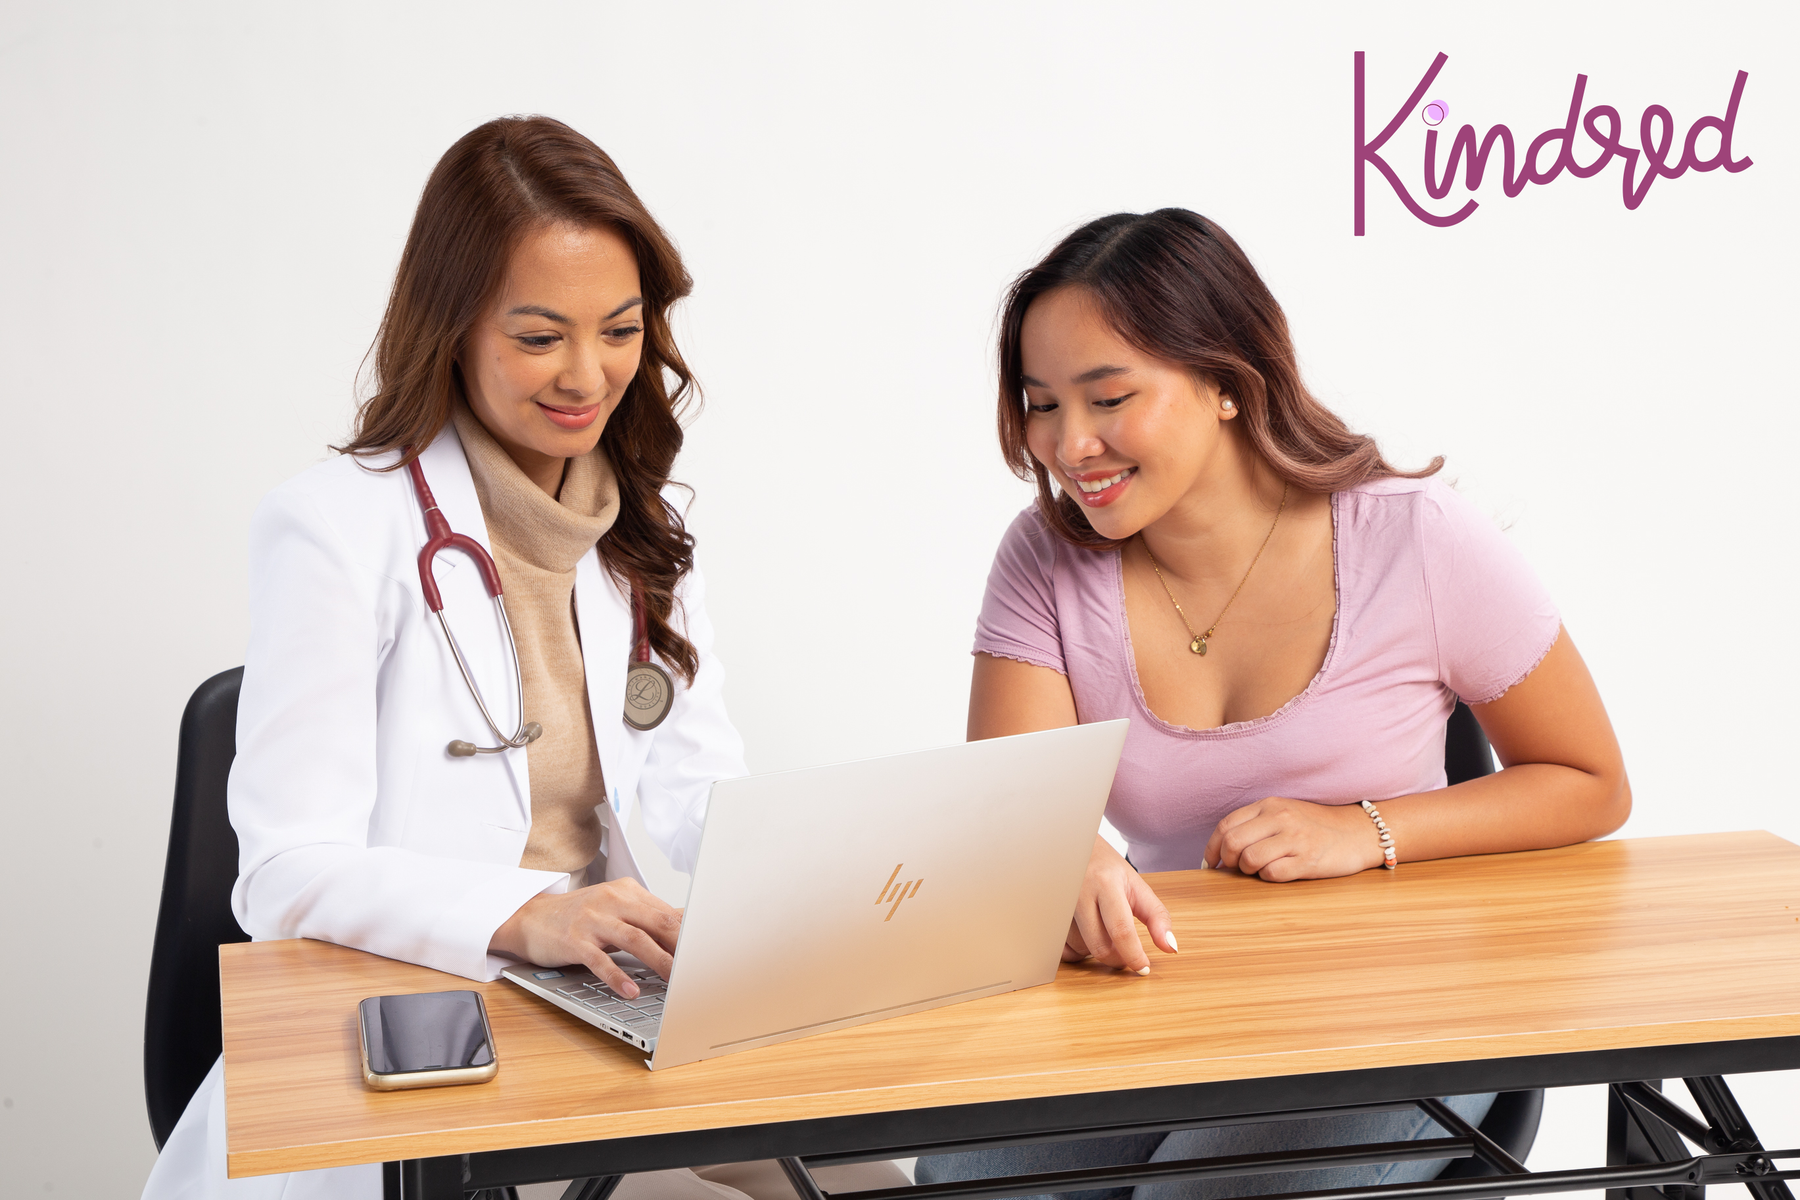 Why Women’s Health Matters: How Kindred.co Is Empowering Women to Take Charge of Their Health